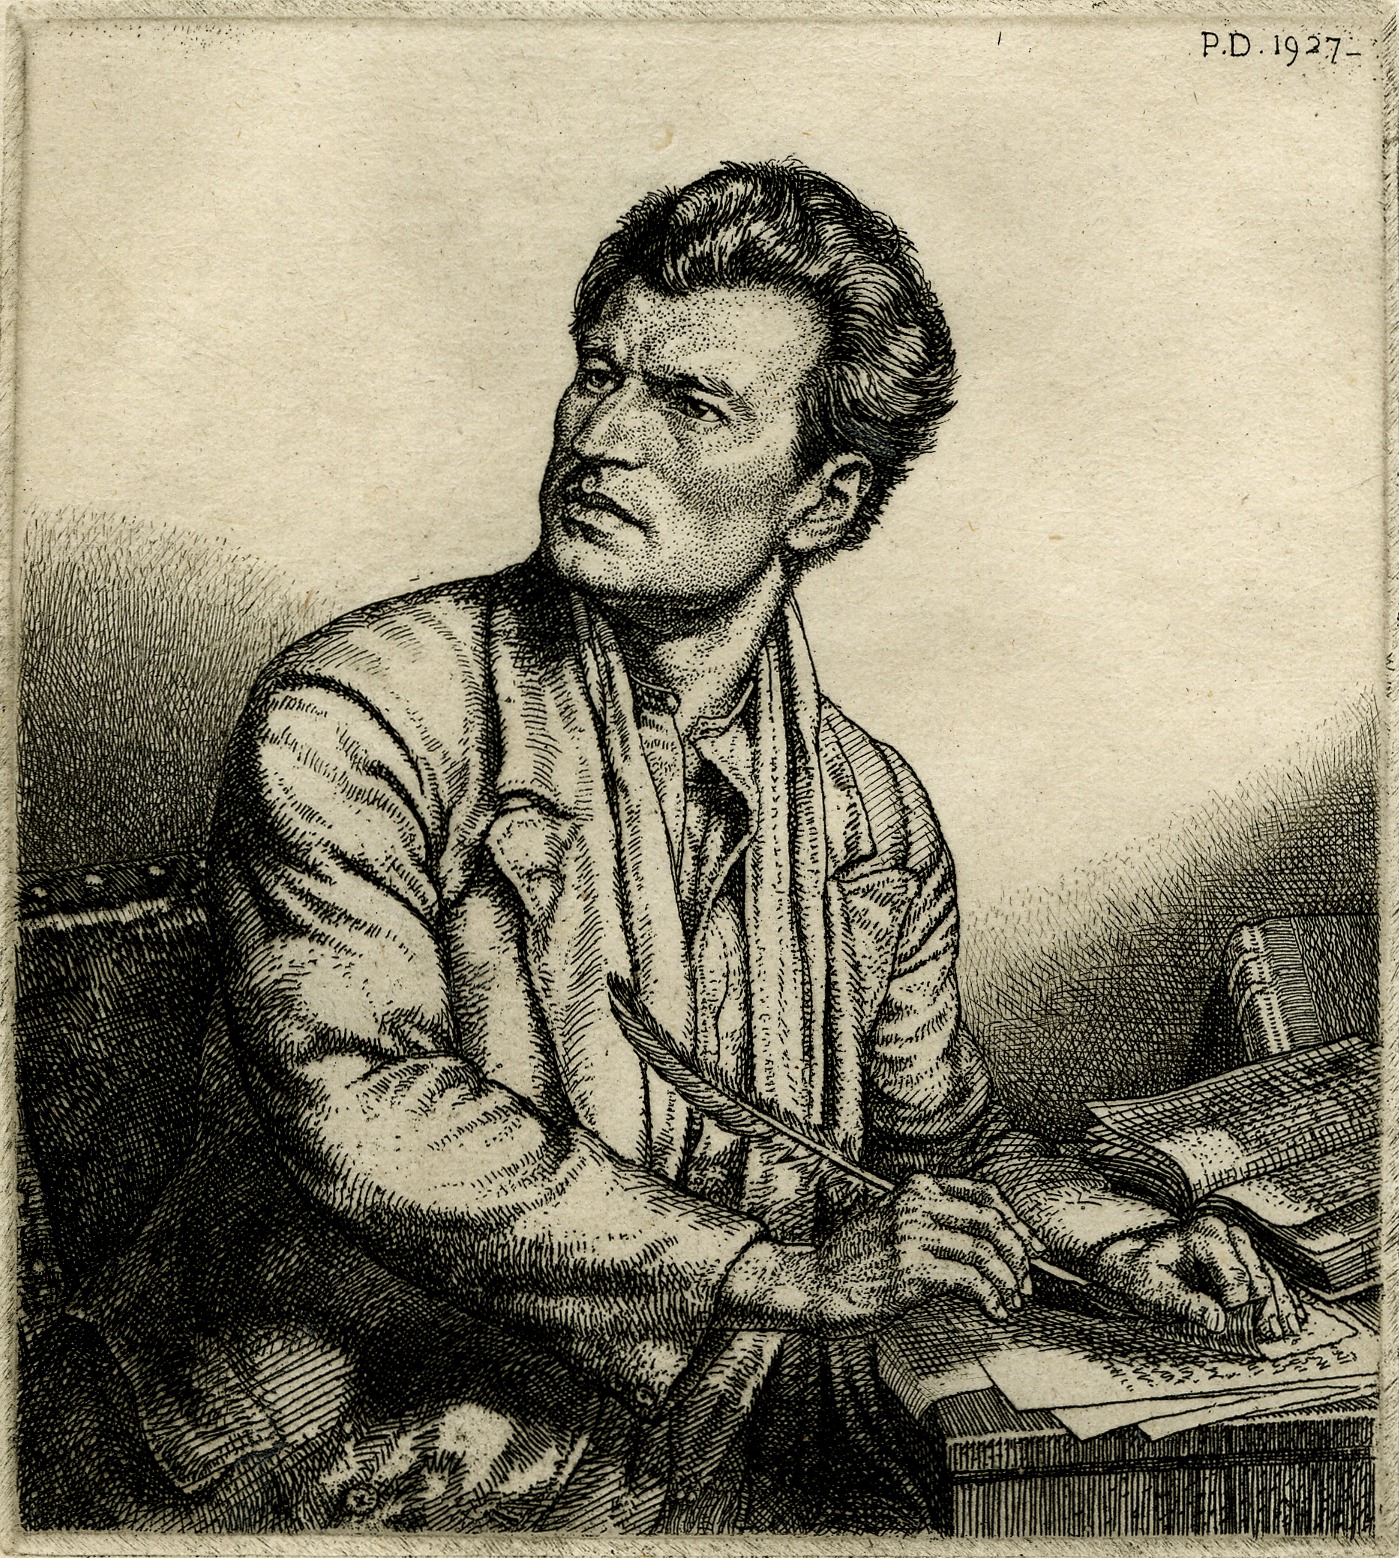 Man with a pen (1927)